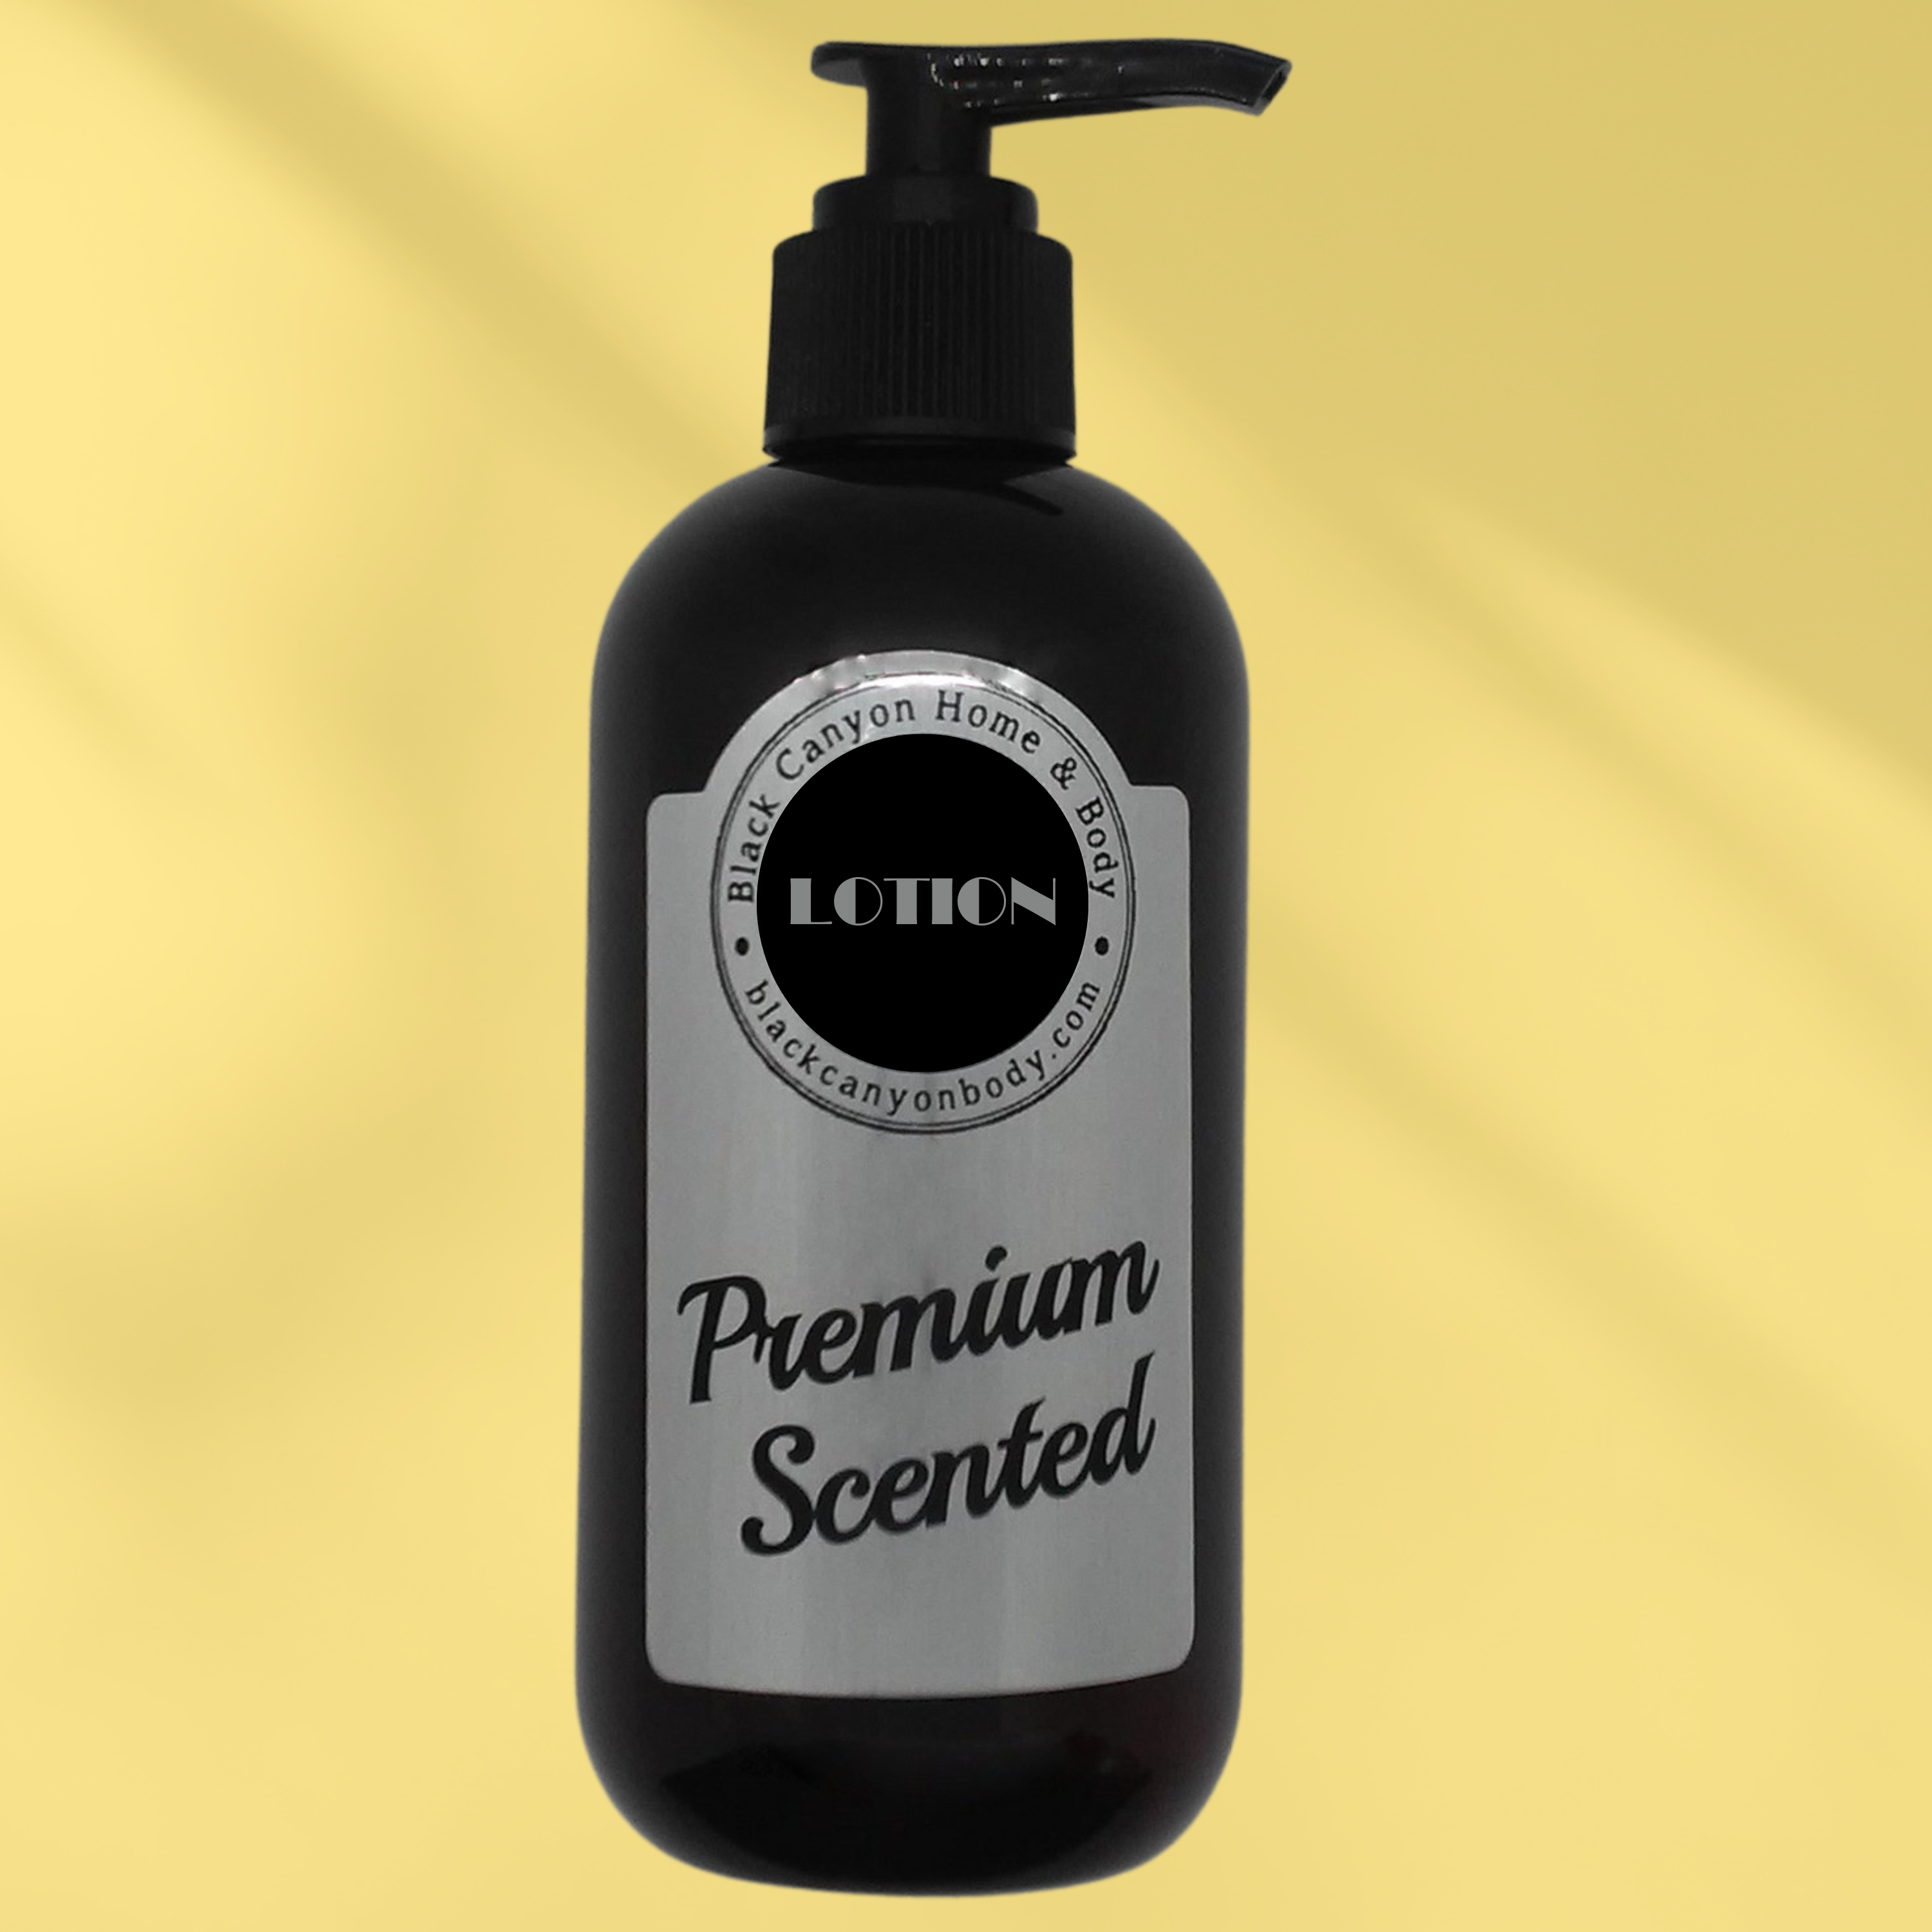 Paydens Cobalt Sugared Lemon & Mint Scented Luxury Body Lotion with Lanolin and Jojoba Oil For Men